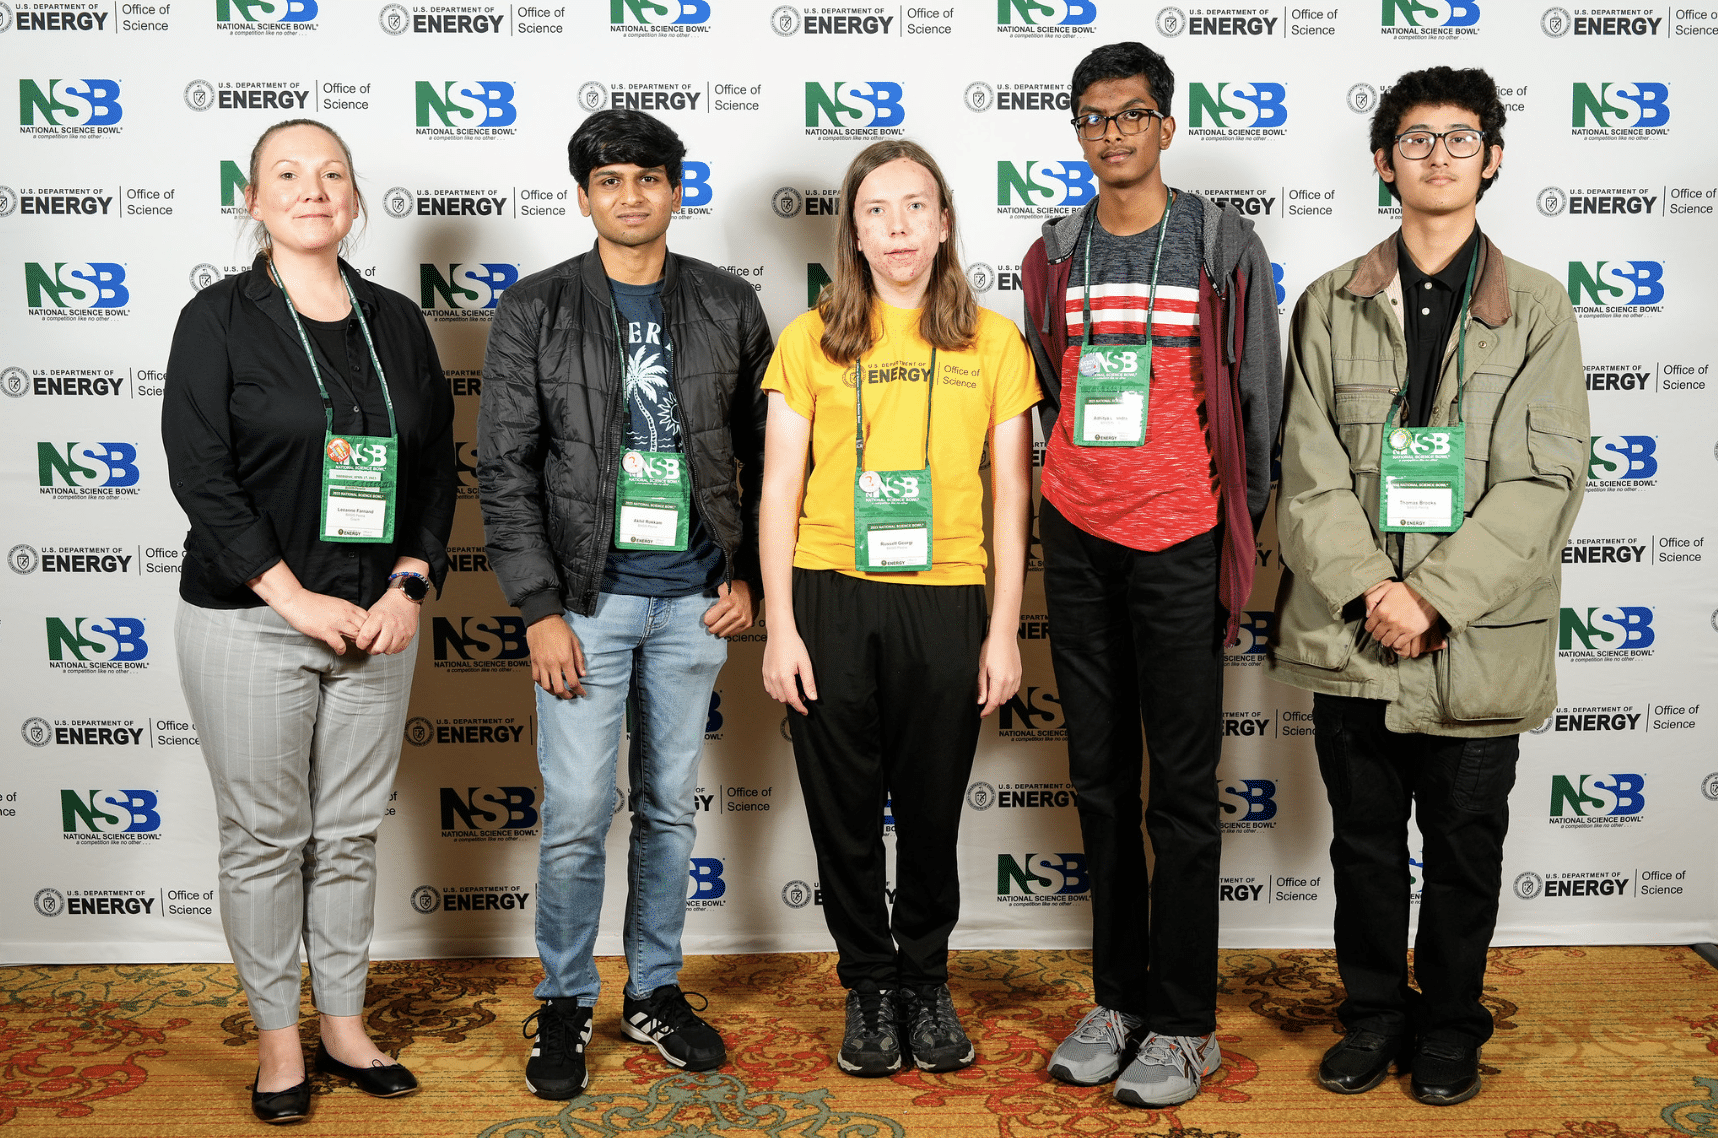 BASIS Peoria High School Division National Science Bowl Competitors 